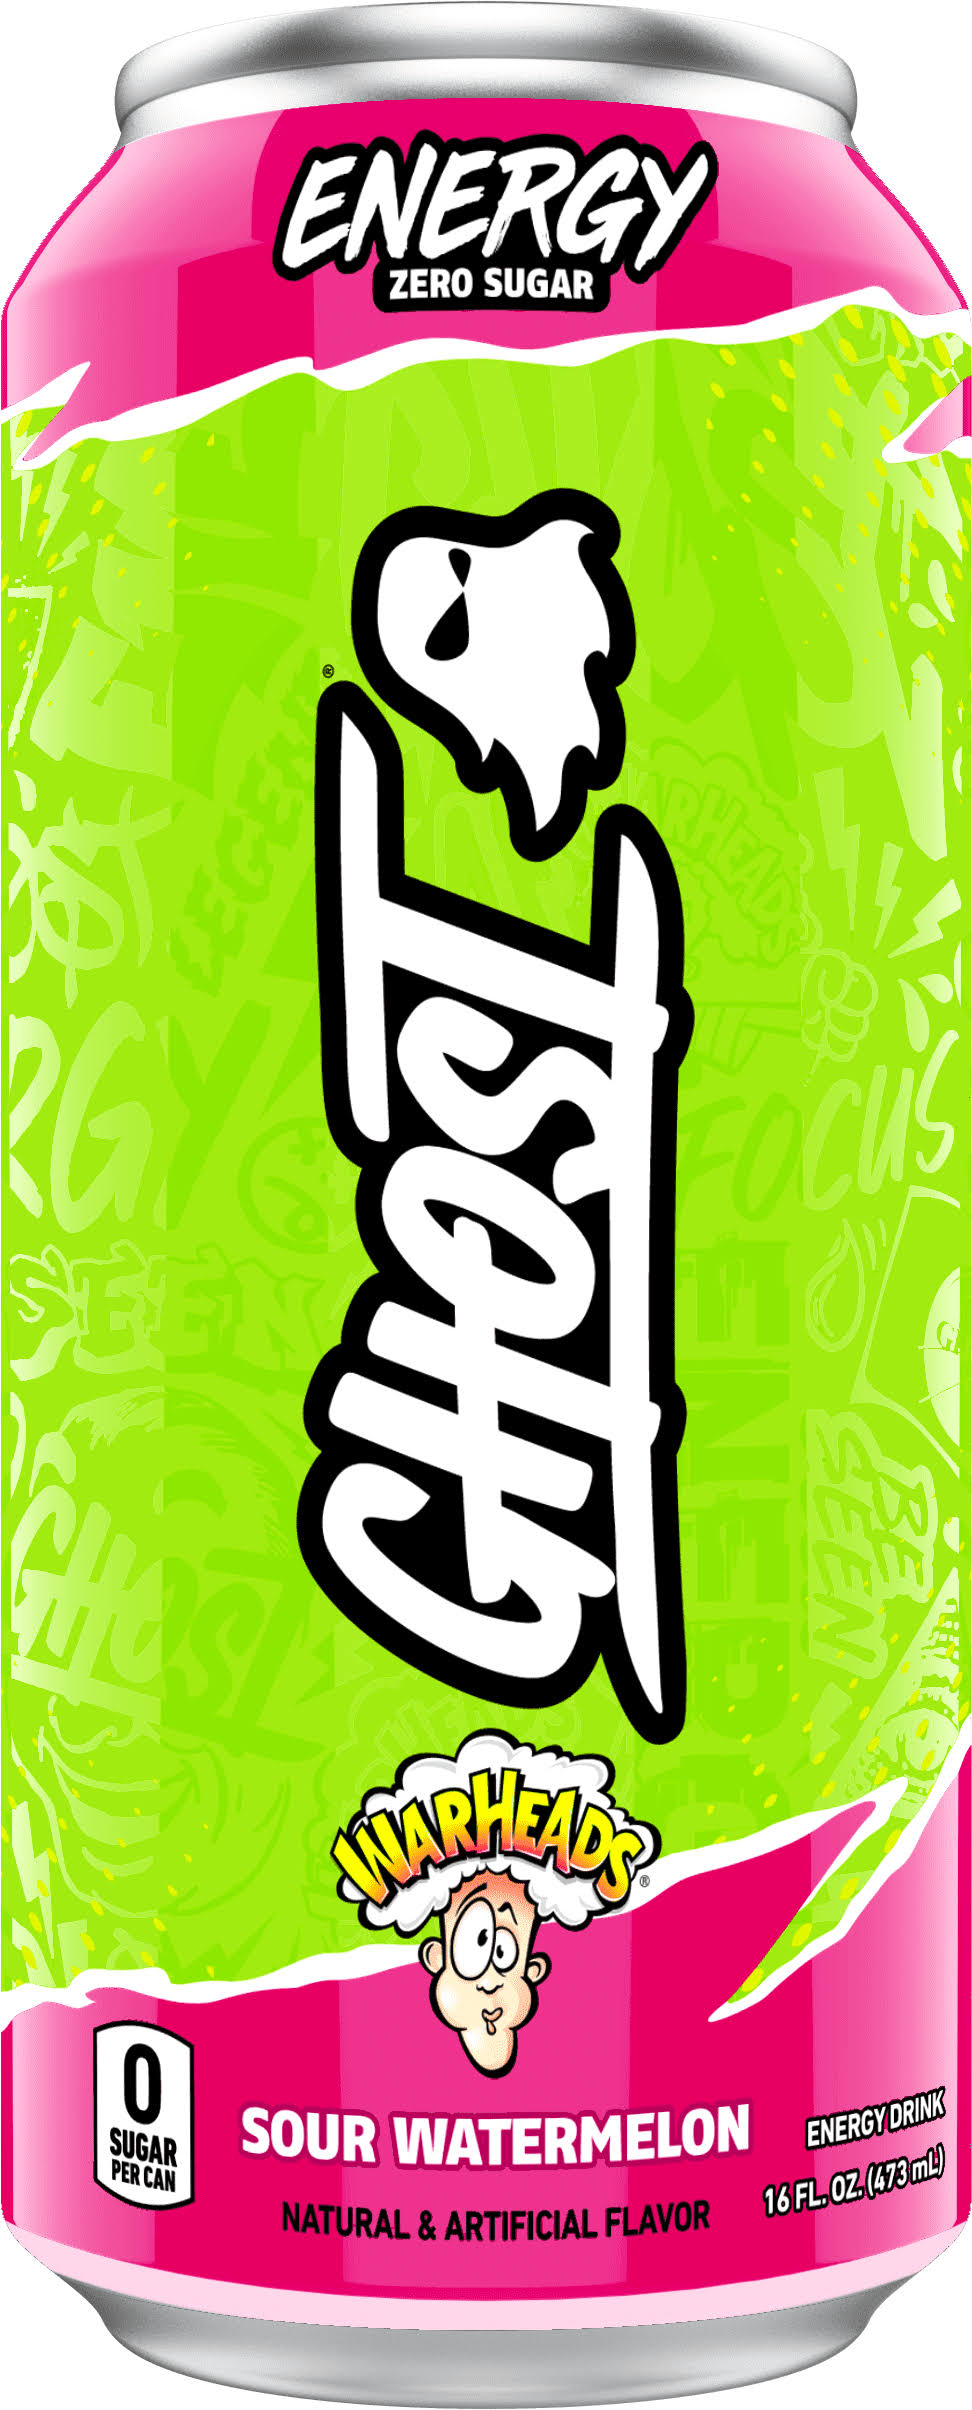 GHOST Energy Drink Sour Watermelon Warheads